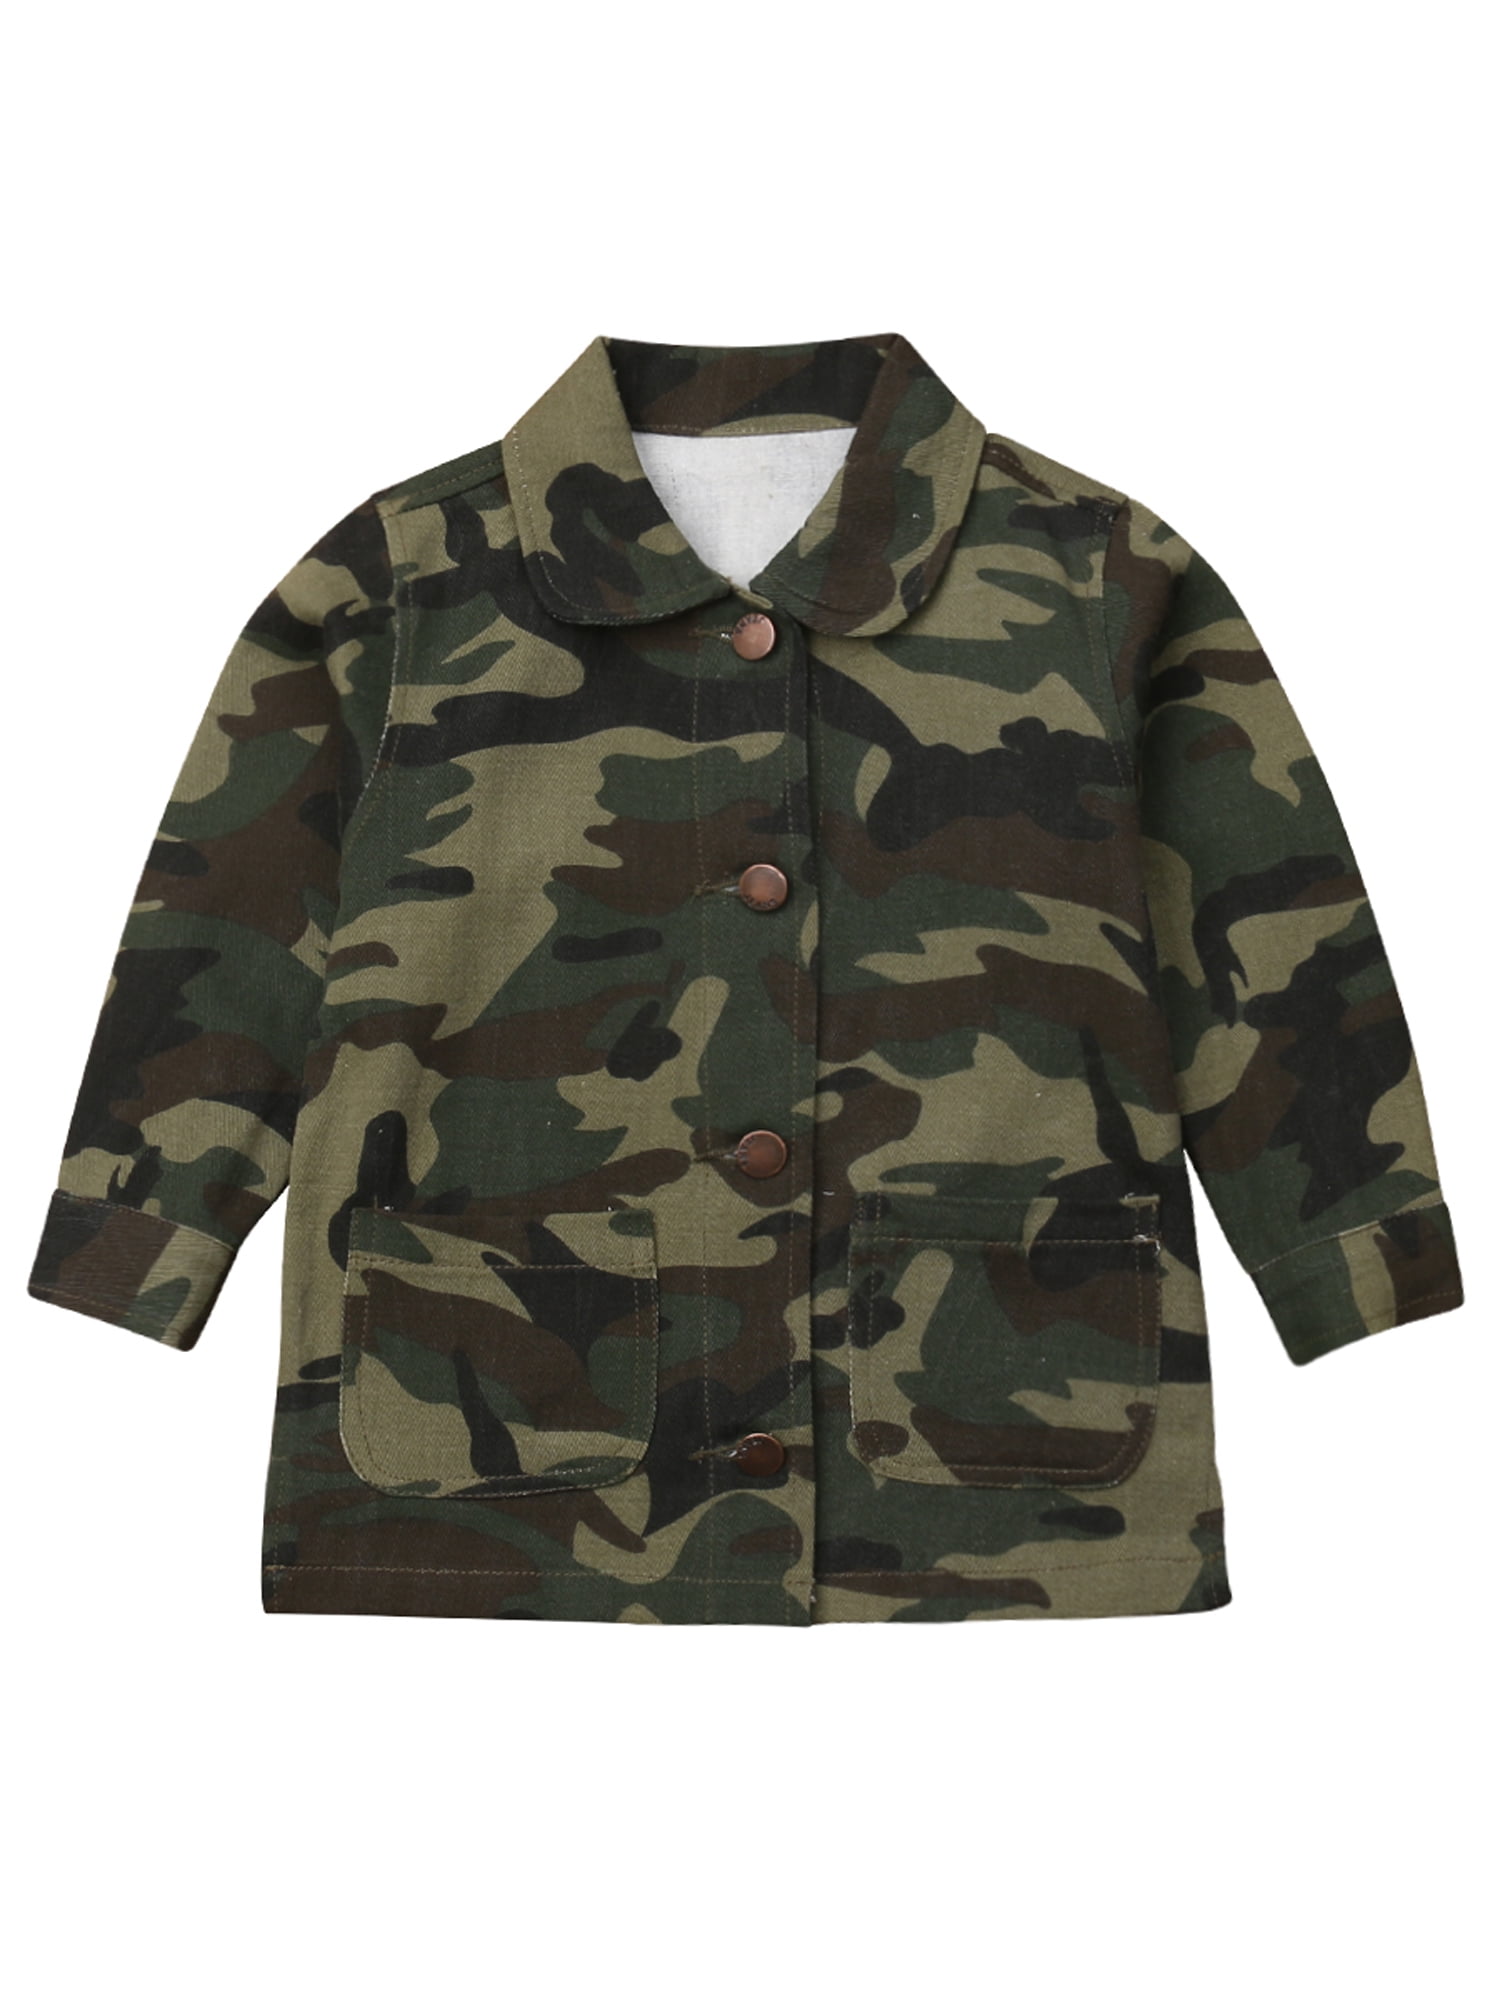 Toddler Little Girl Camouflage Jacket Coat Letter Heart Print Button Down Outerwear Winter/Fall/Spring Kids Clothing